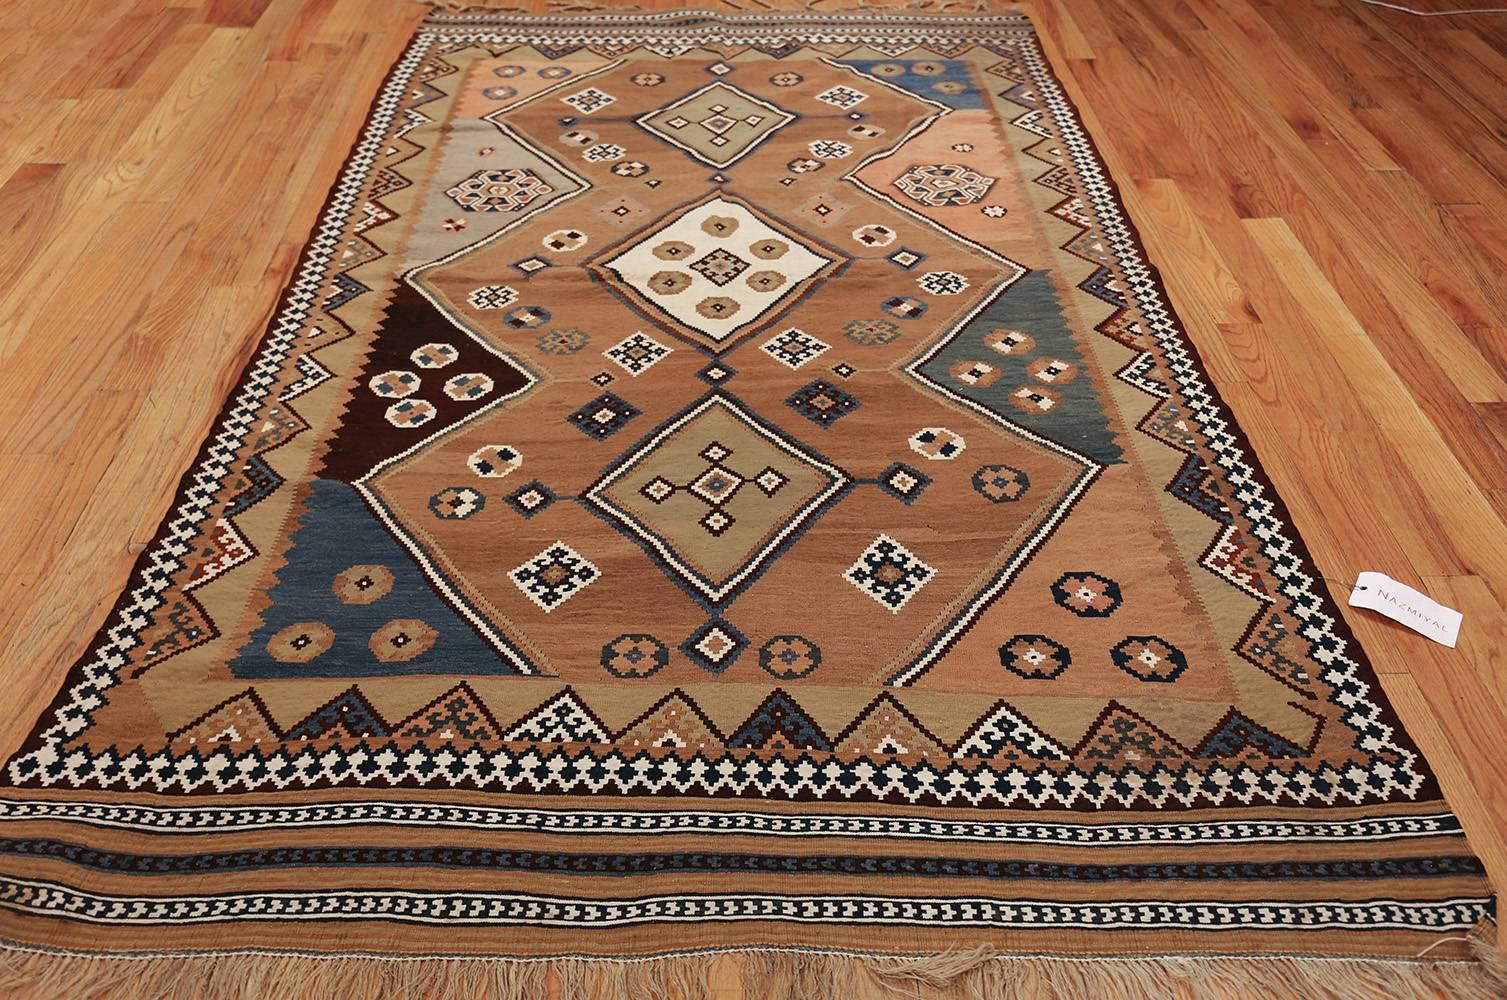 Antique Persian Kilim. Size: 5 ft 1 in x 8 ft 3 in (1.55 m x 2.51 m) 3